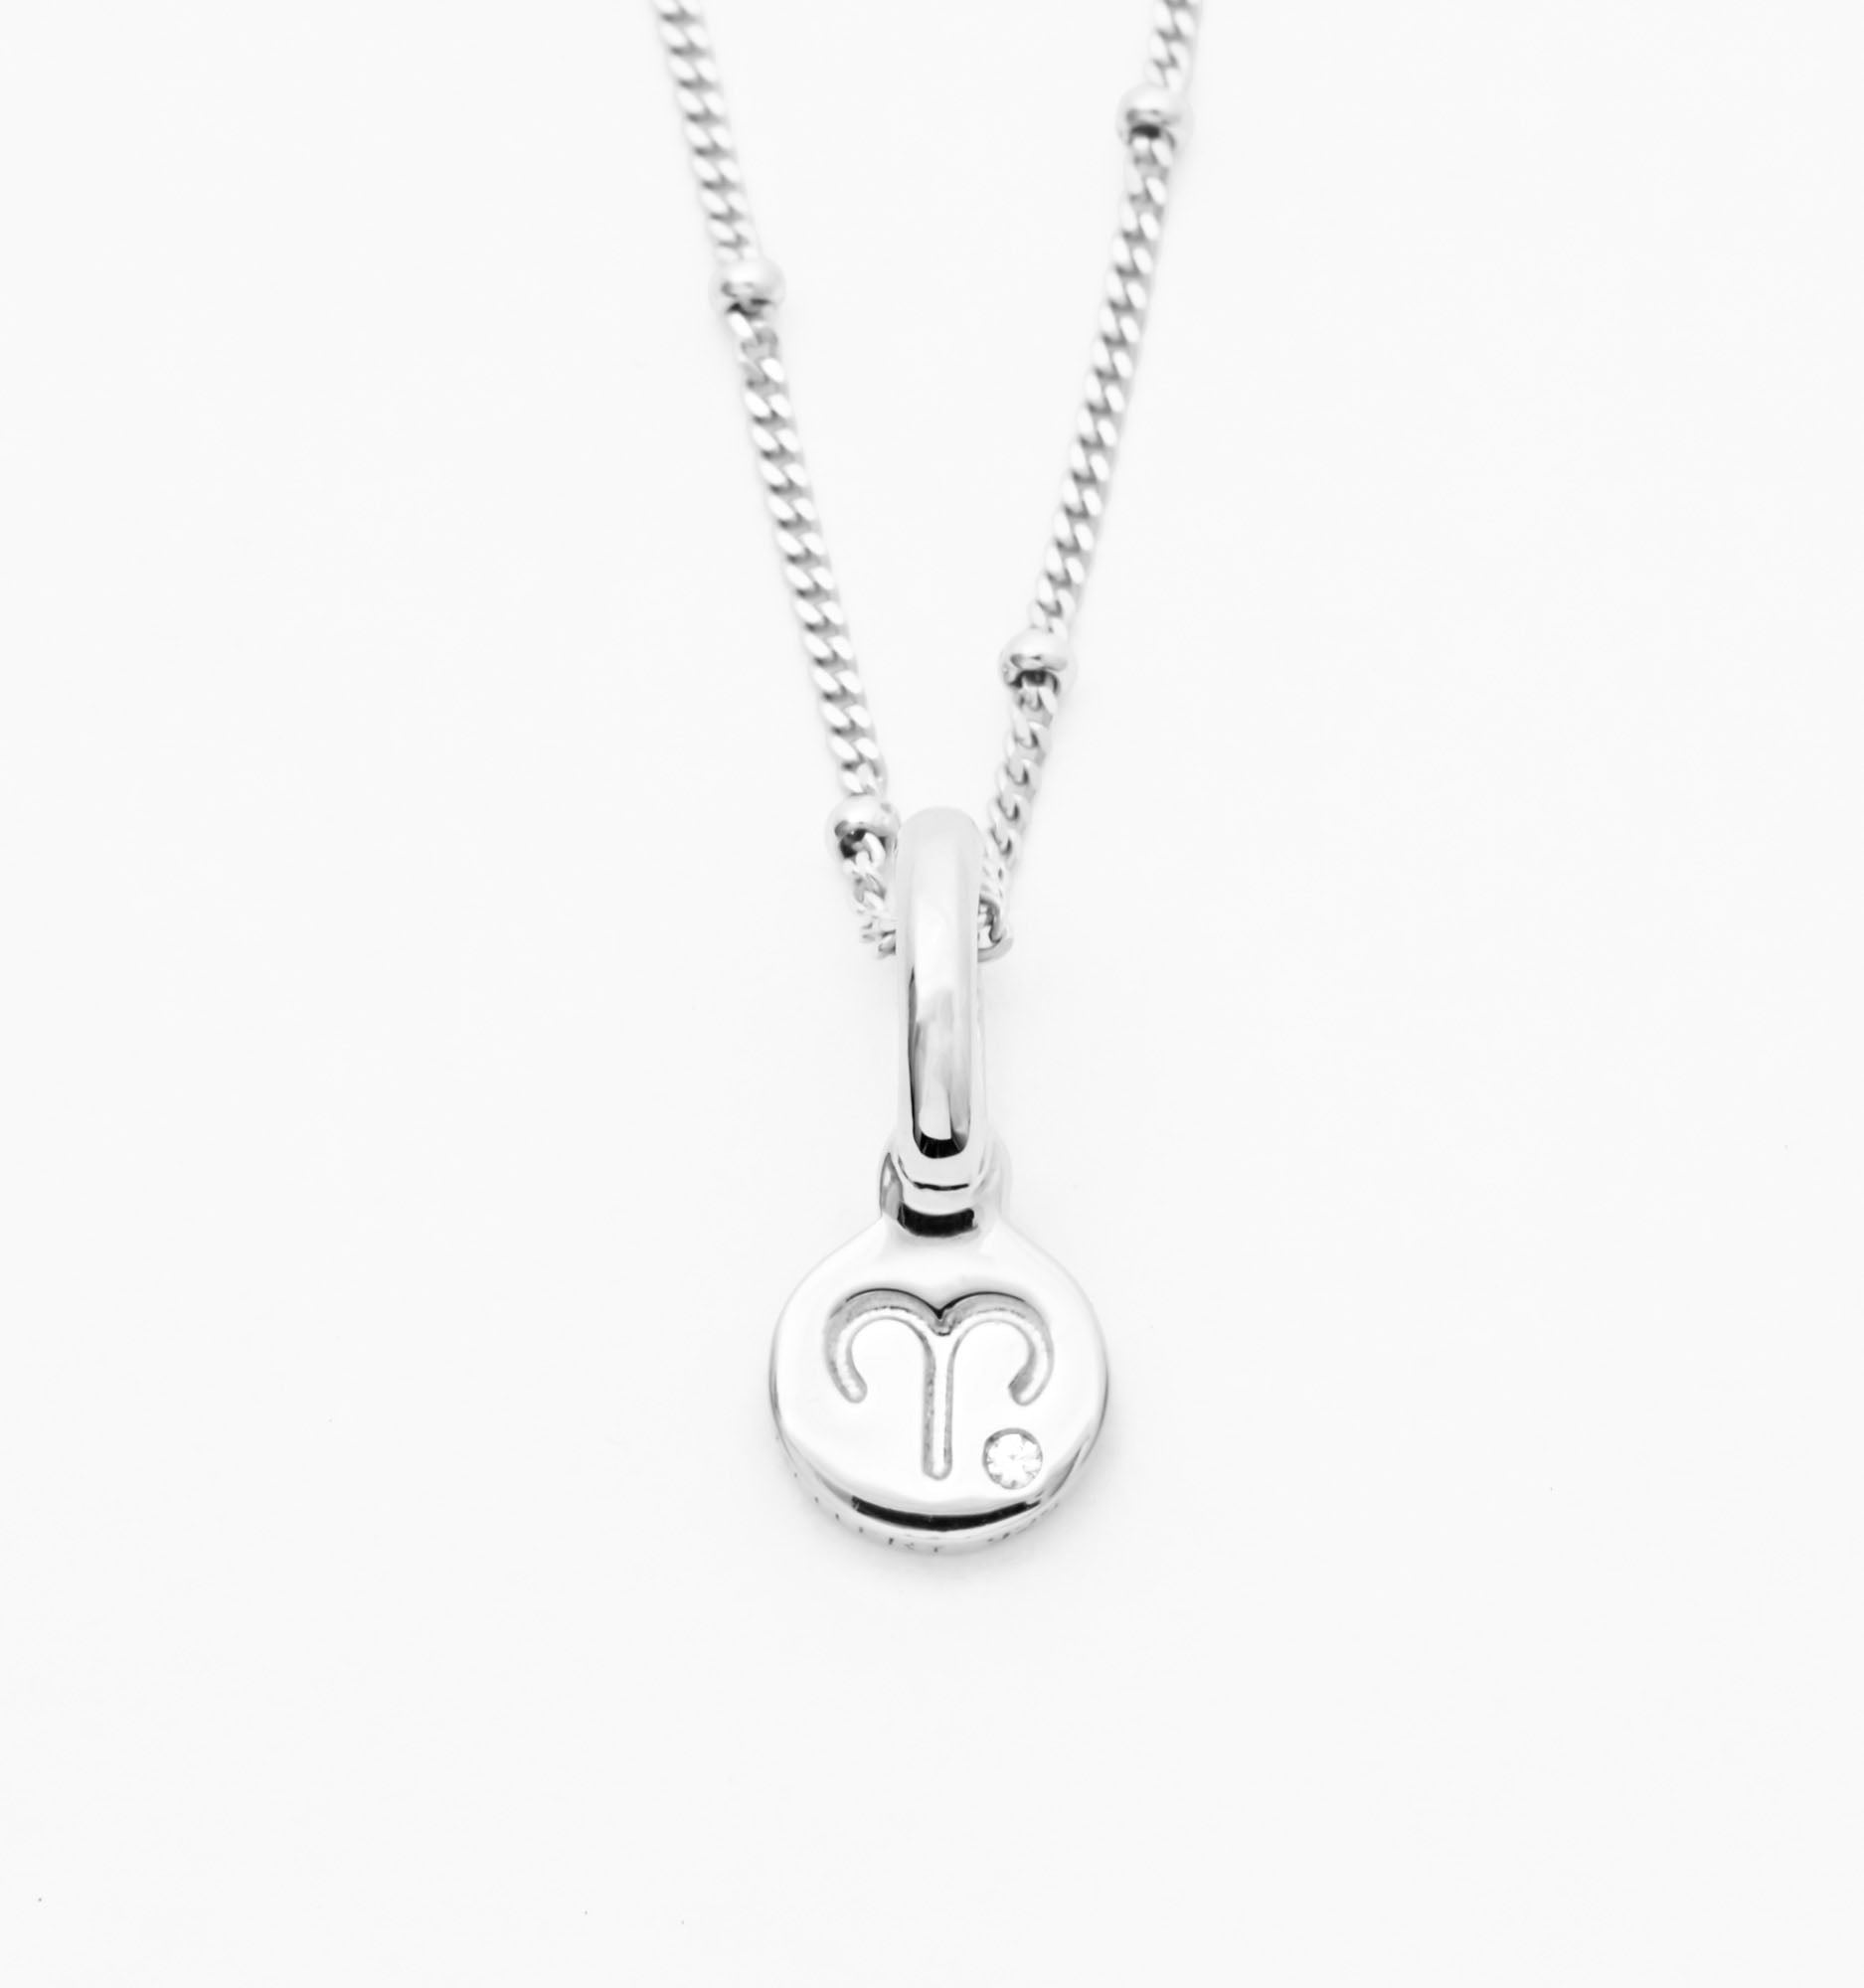 Aries Necklace